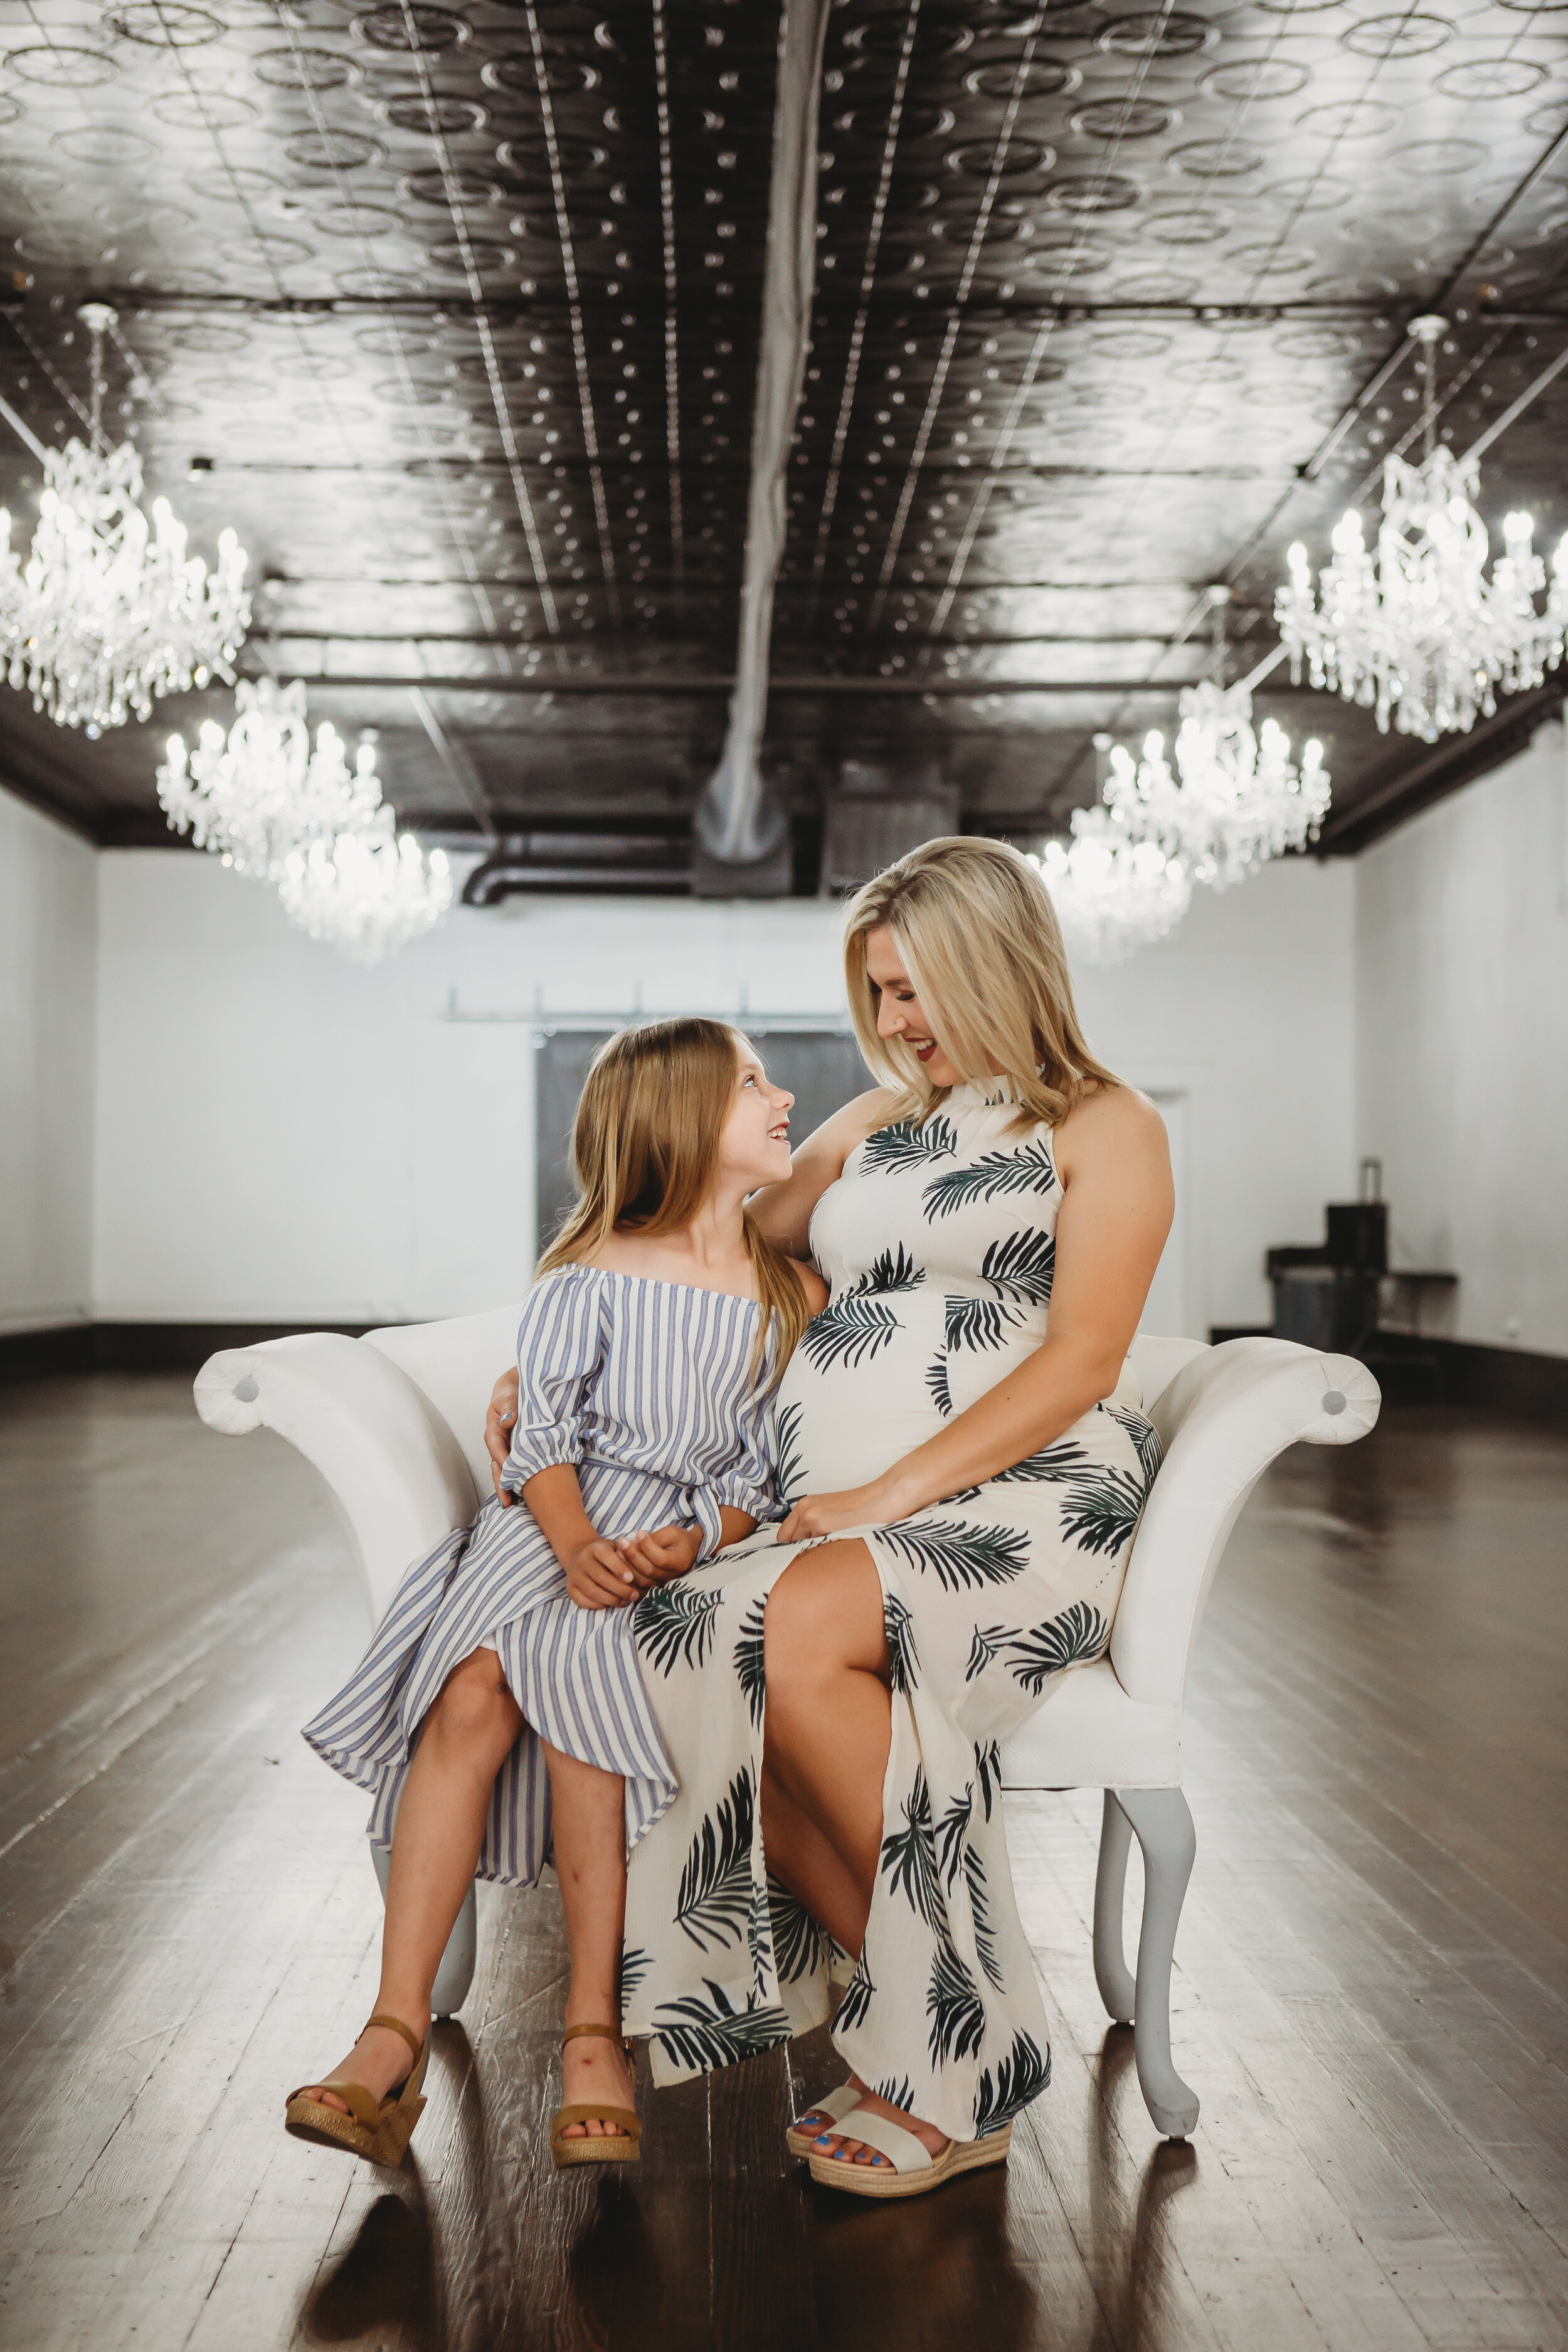  Mother and daughter side by side in room lined with chandeliers #tealawardphotography #texasmaternityphotographysession #amarillophotographer #amarilloematernityphotographer #emotionalphotography #lifestylephotography #babyontheway #lifestyles #expectingmom #newaddition #sweetbaby #motherhoodmagic 